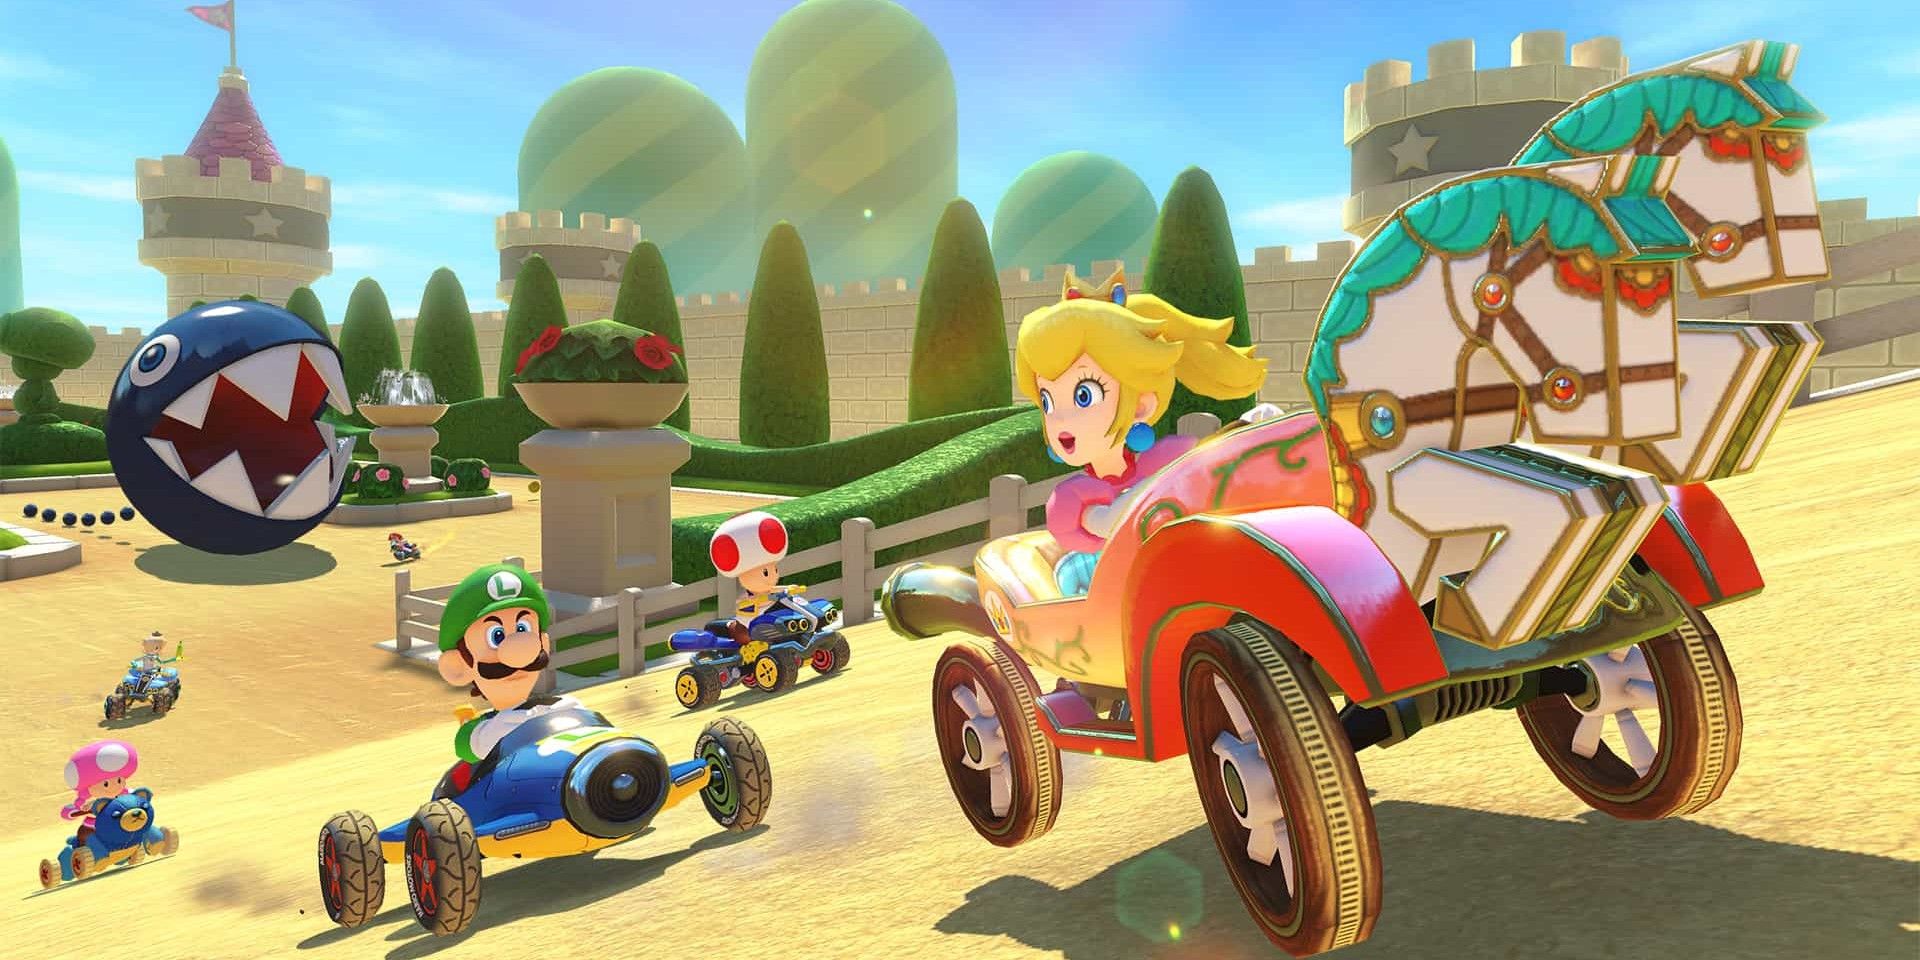 Peach Garden Mario Kart 8 races with Peach in the lead and Luigi, Toad, Toadette and a Chain Chomp behind her.